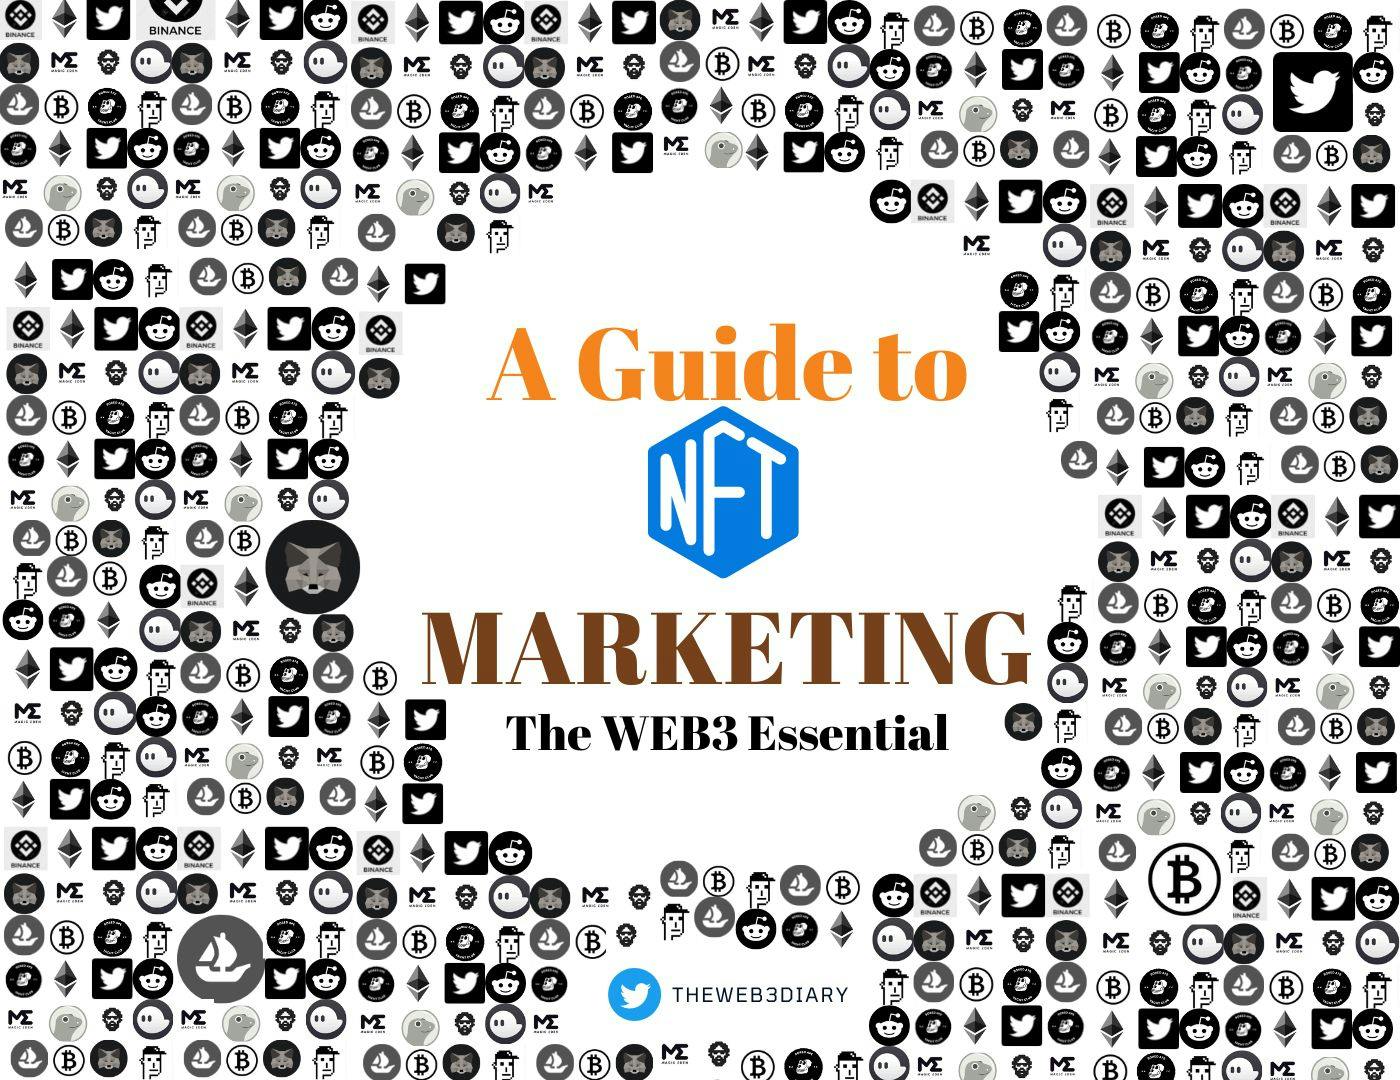 /a-guide-to-nft-marketing-a-web3-essential feature image